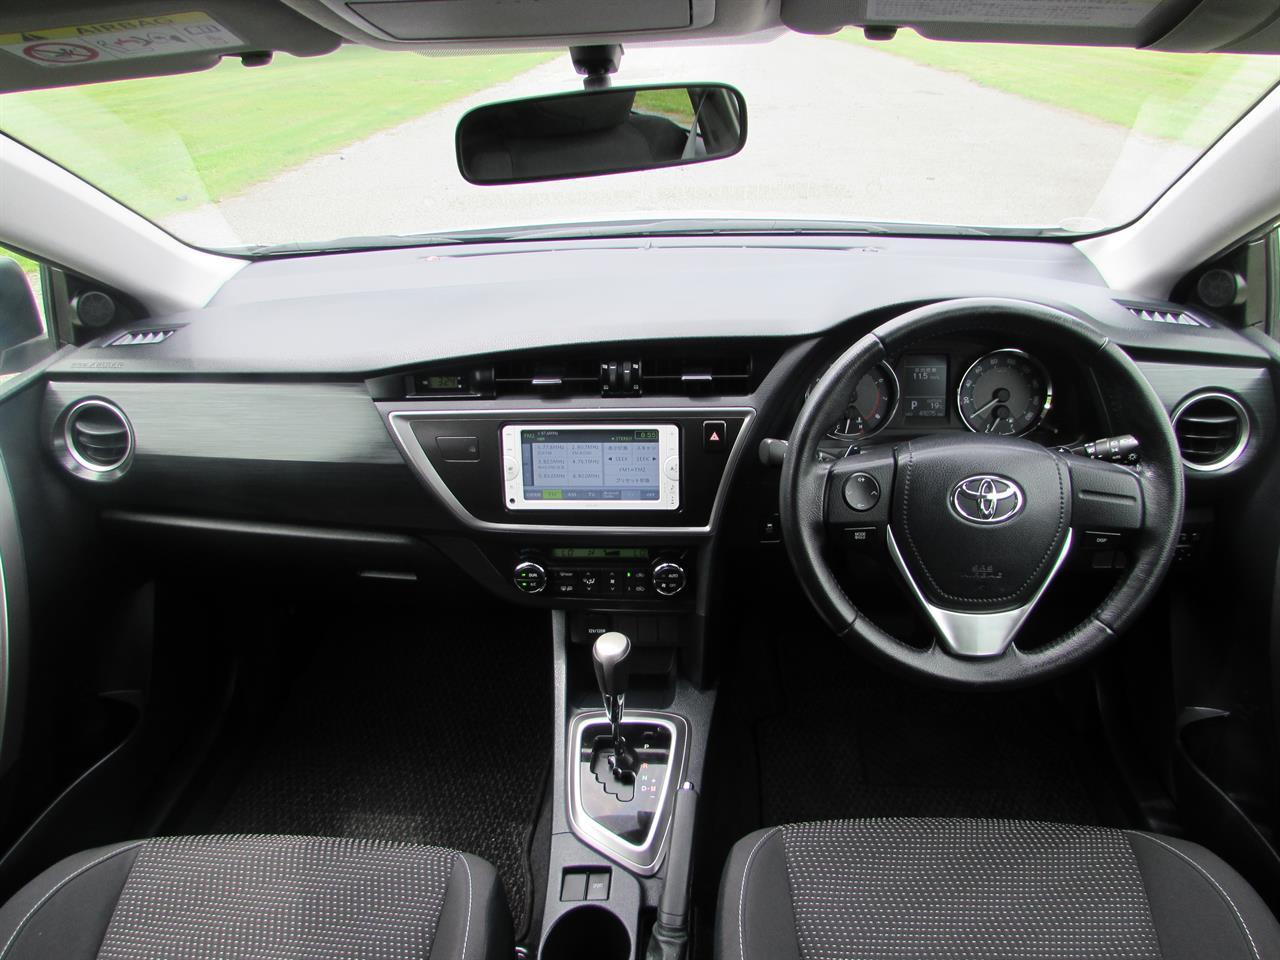 2013 Toyota AURIS only $74 weekly